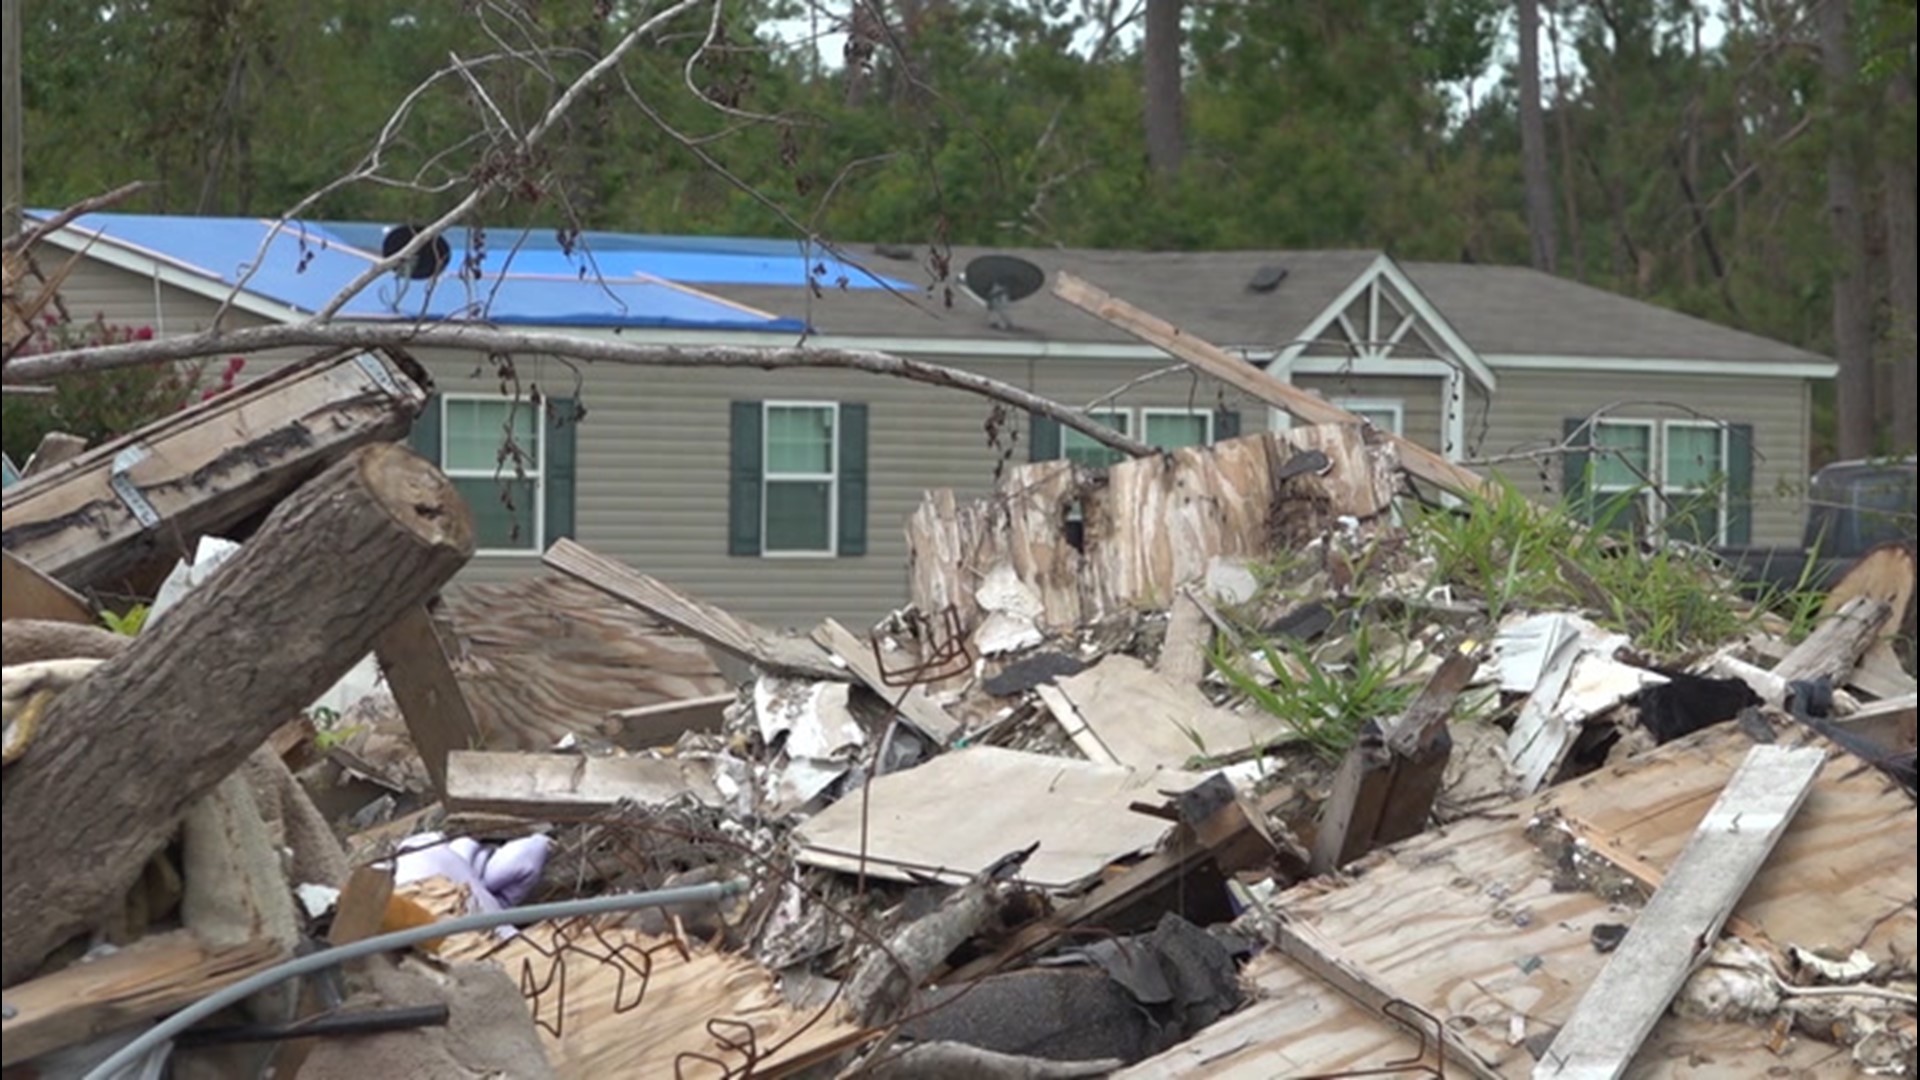 Families impacted by a tornado that tore through Onalaska, Texas, on April 22 say the cleanup process has been complicated by COVID-19.